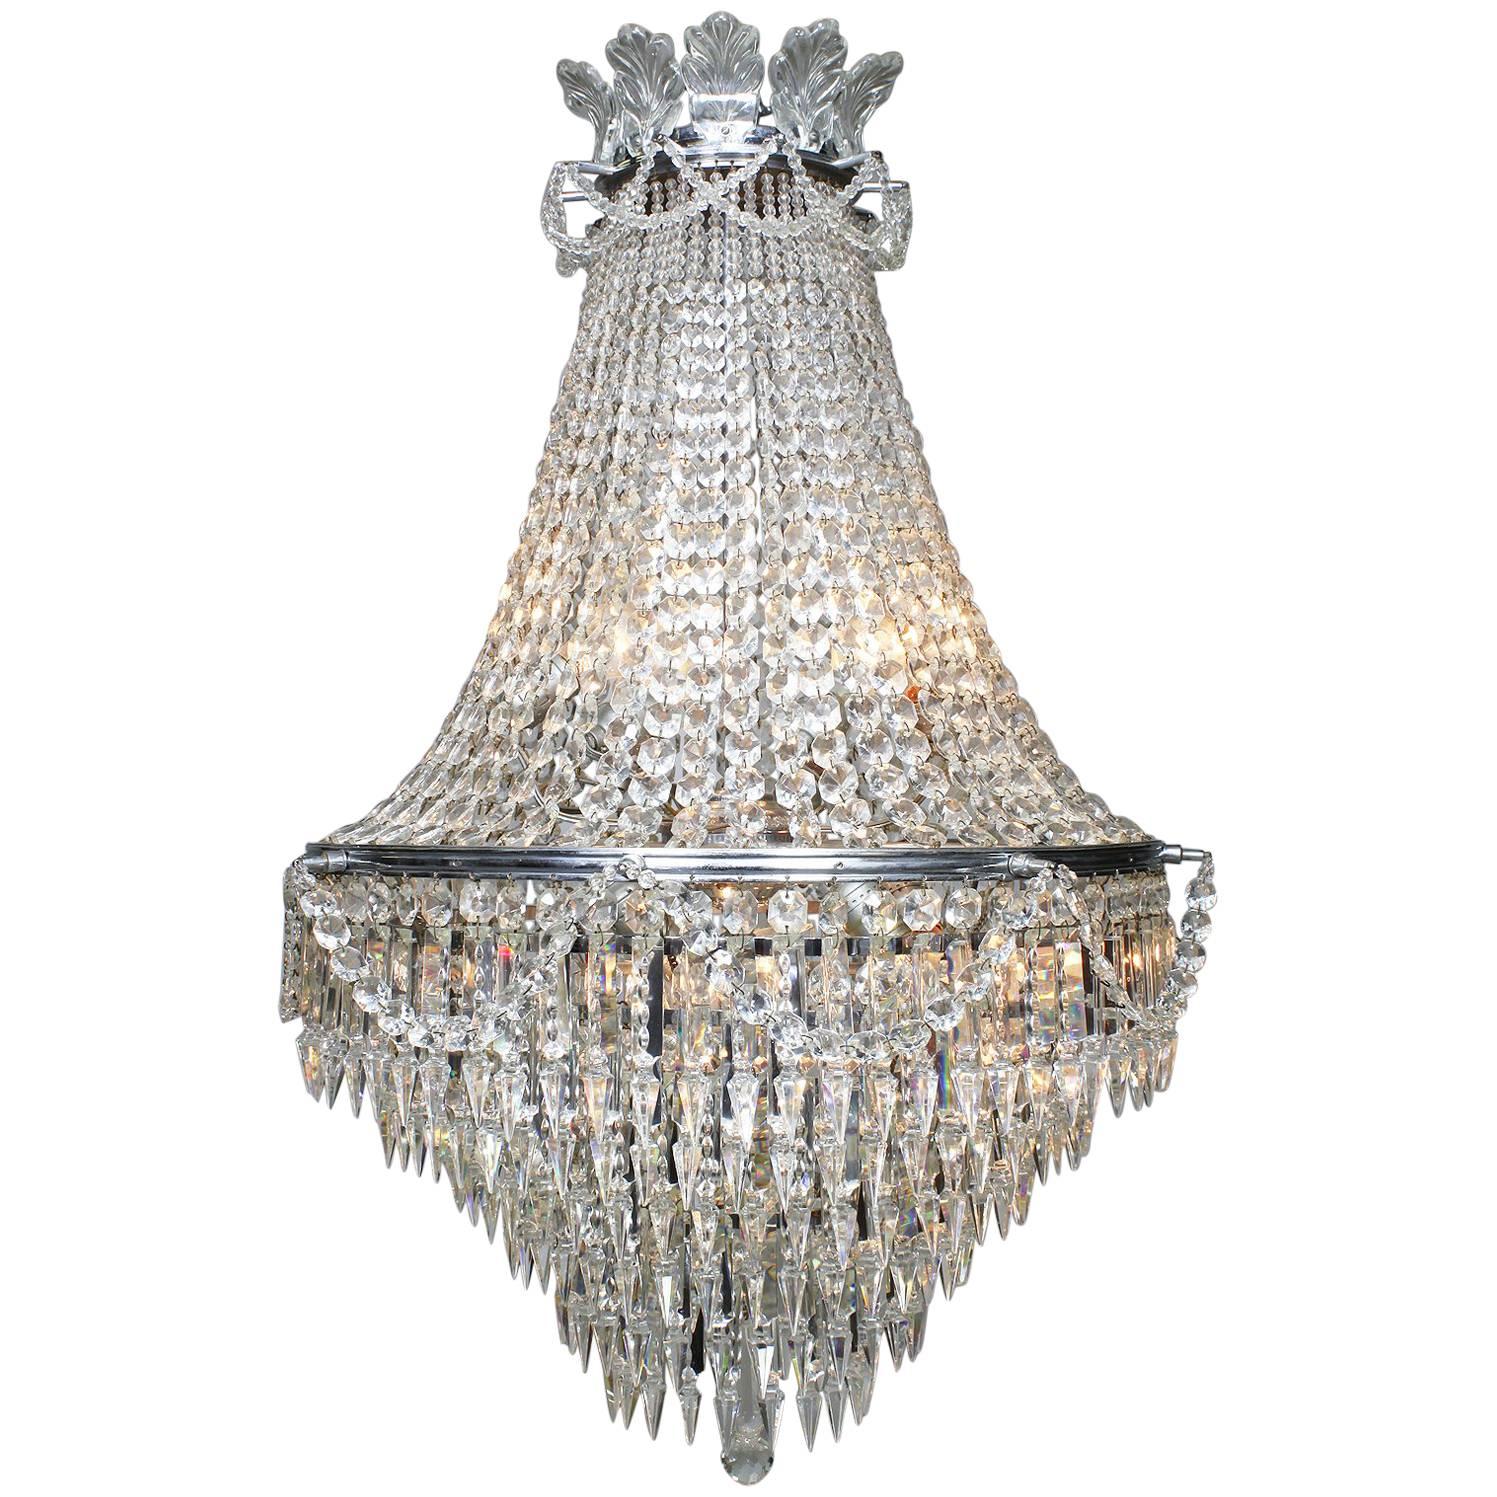 French Belle Epoque 19th-20th Century Cut-Glass Chandelier, Baccarat Attributed For Sale